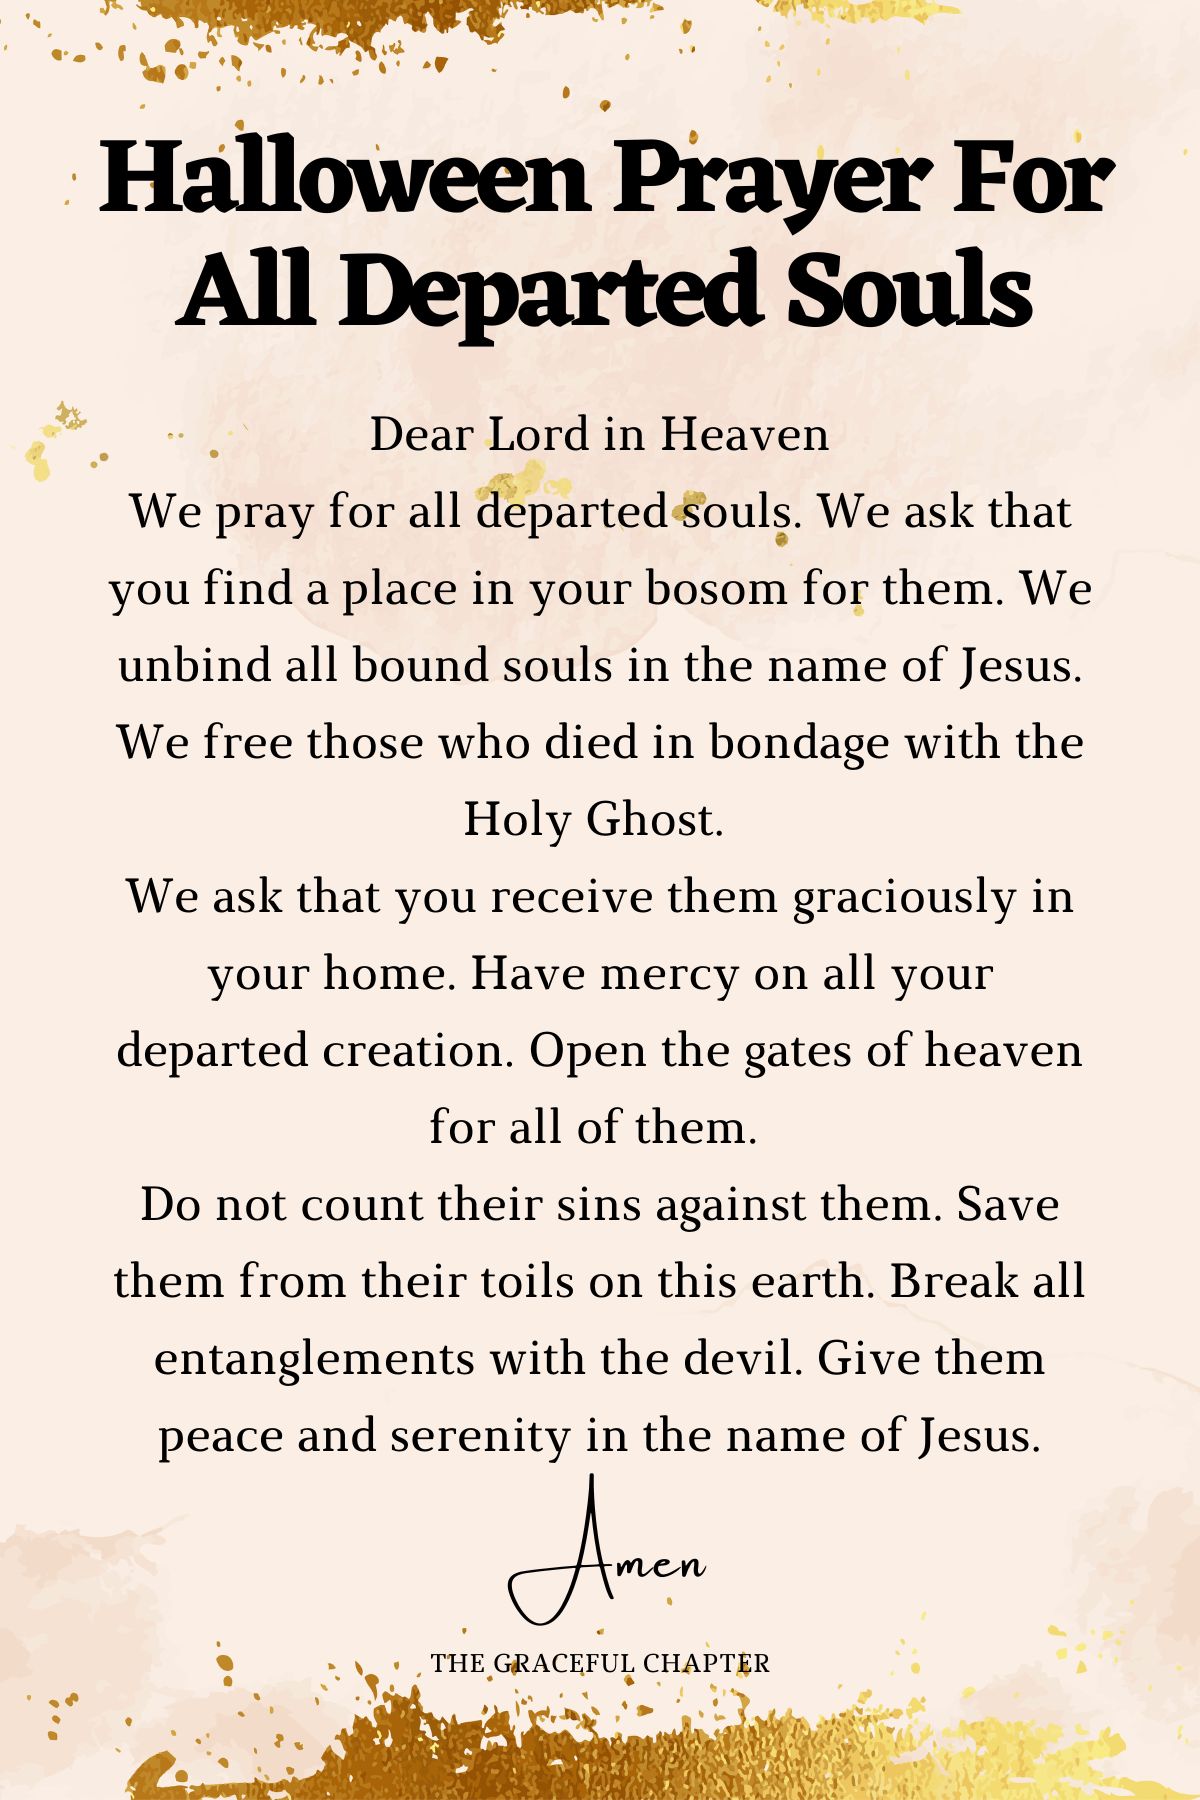 Prayer for all departed souls